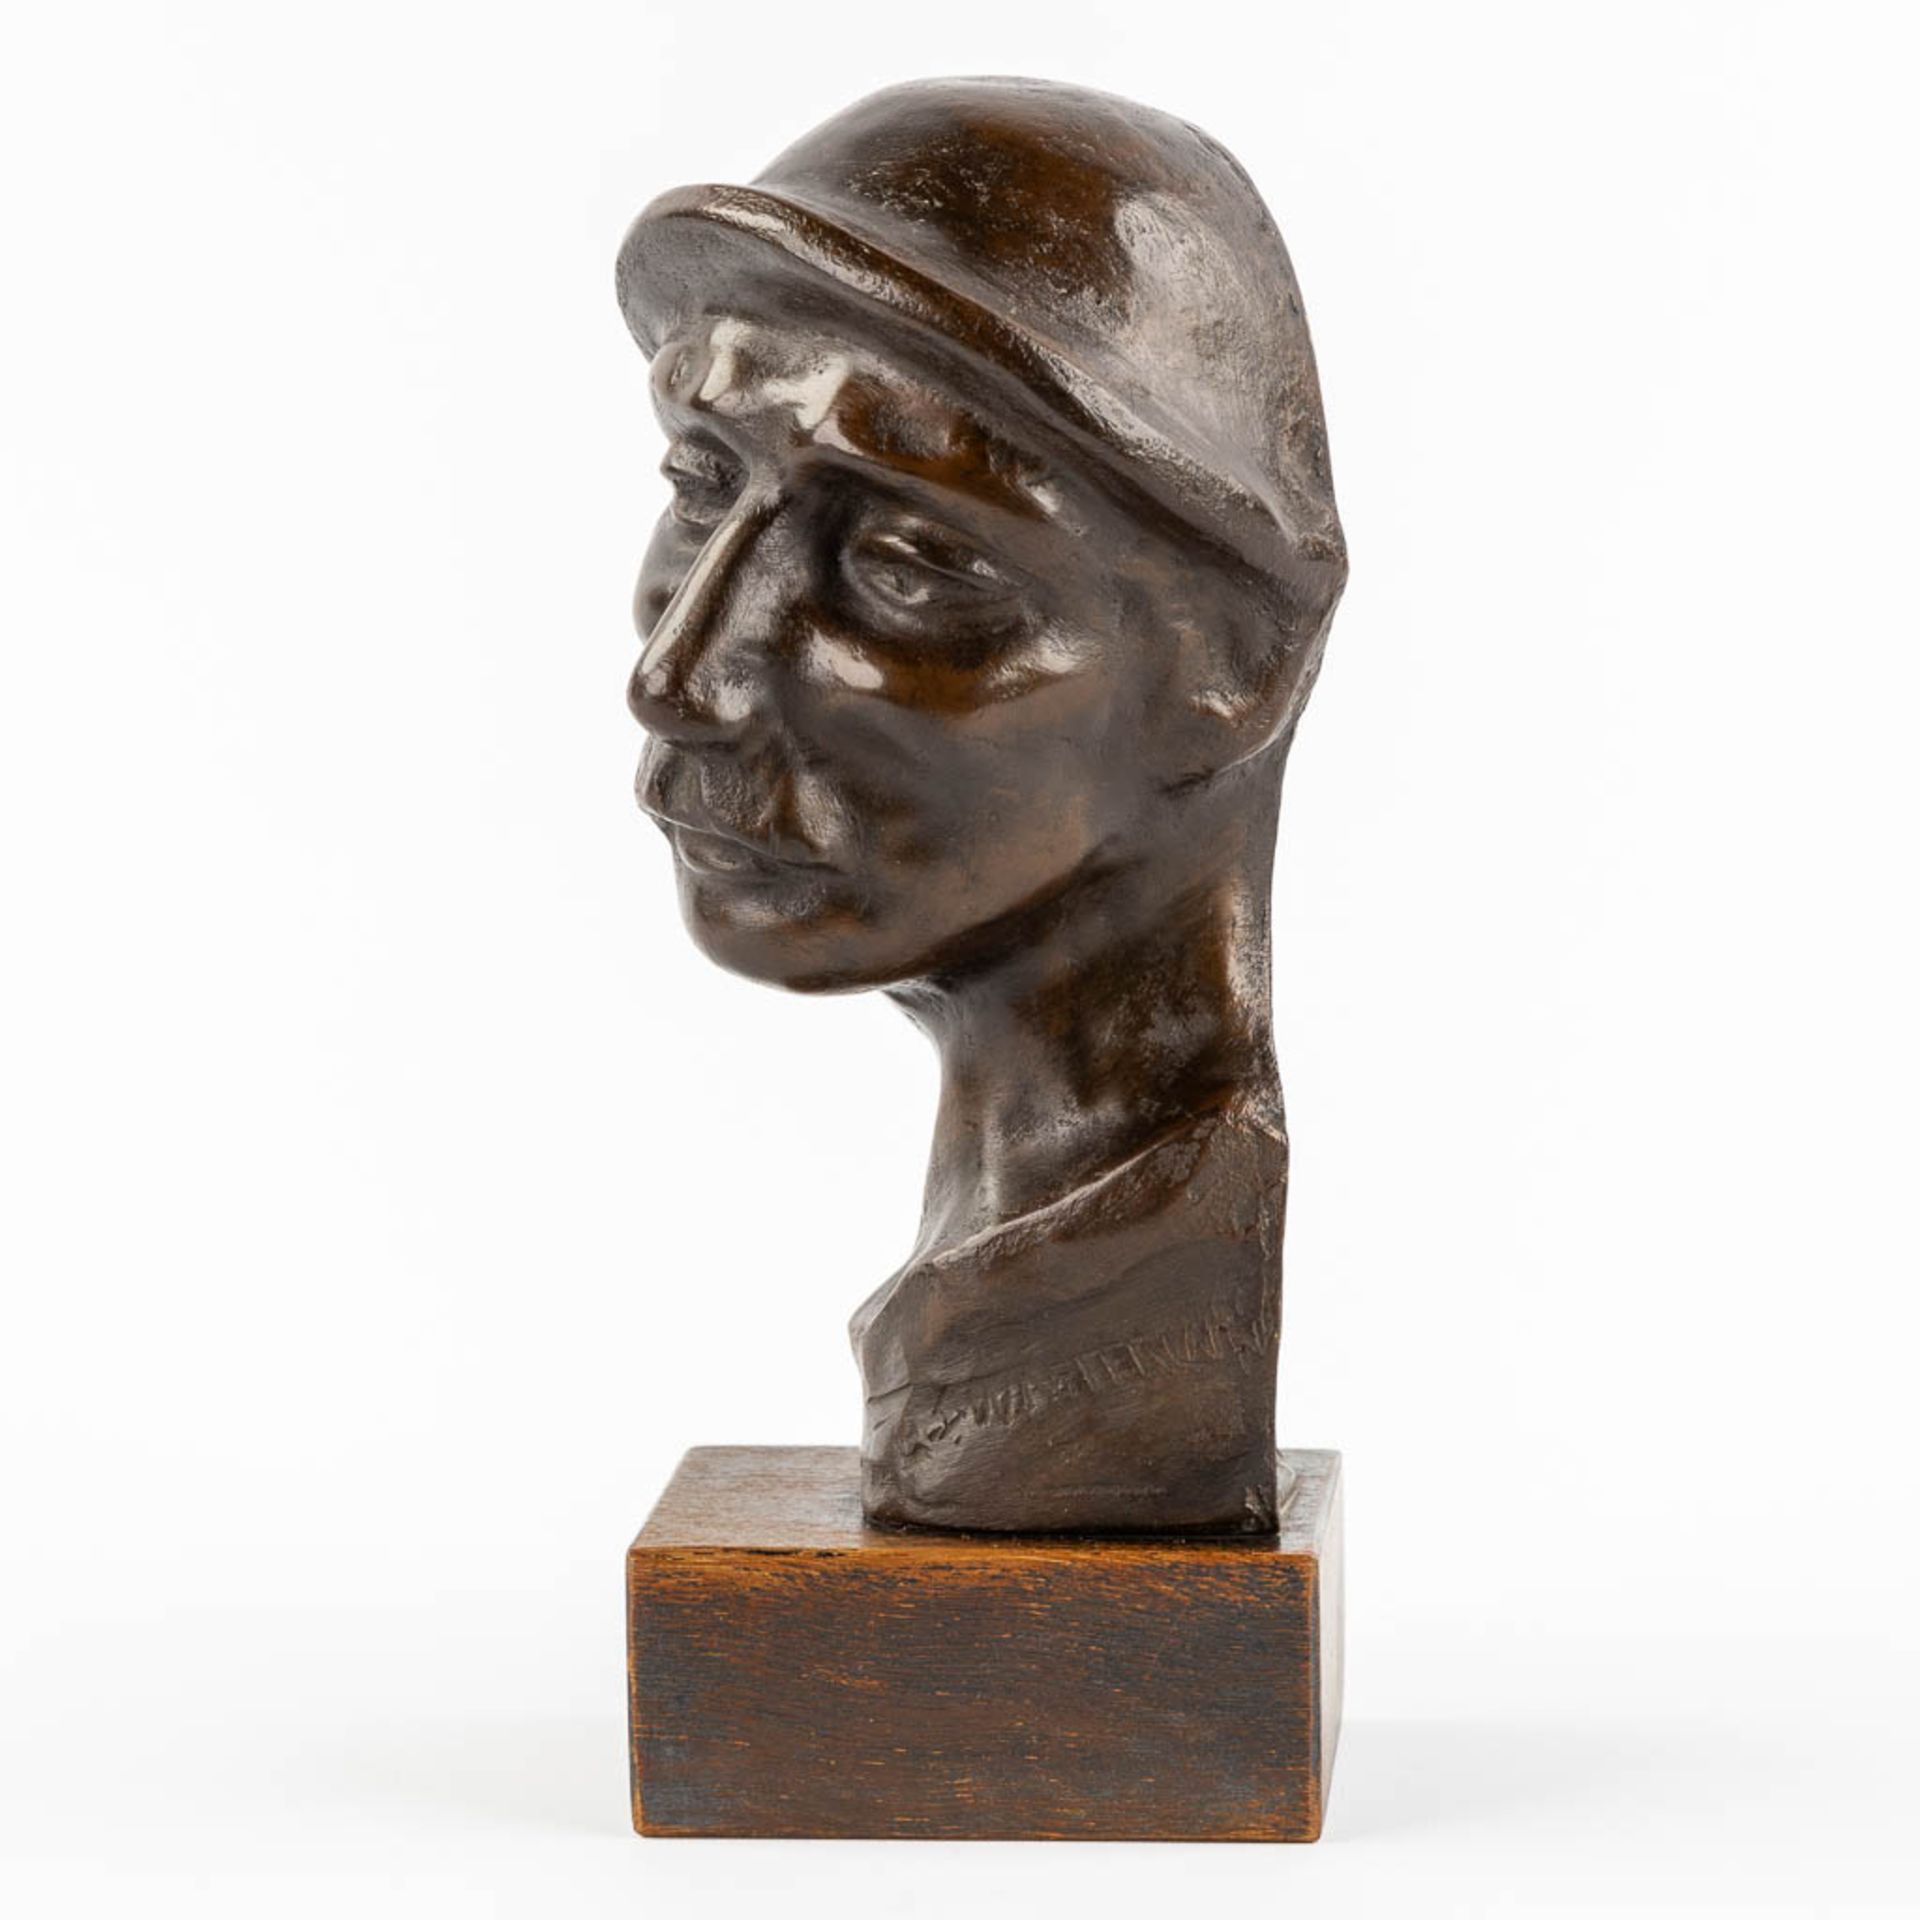 Georges WASTERLAIN (1889-1963) 'Mineur' patinated bronze. (L:11 x W:13 x H:26,5 cm) - Image 6 of 11